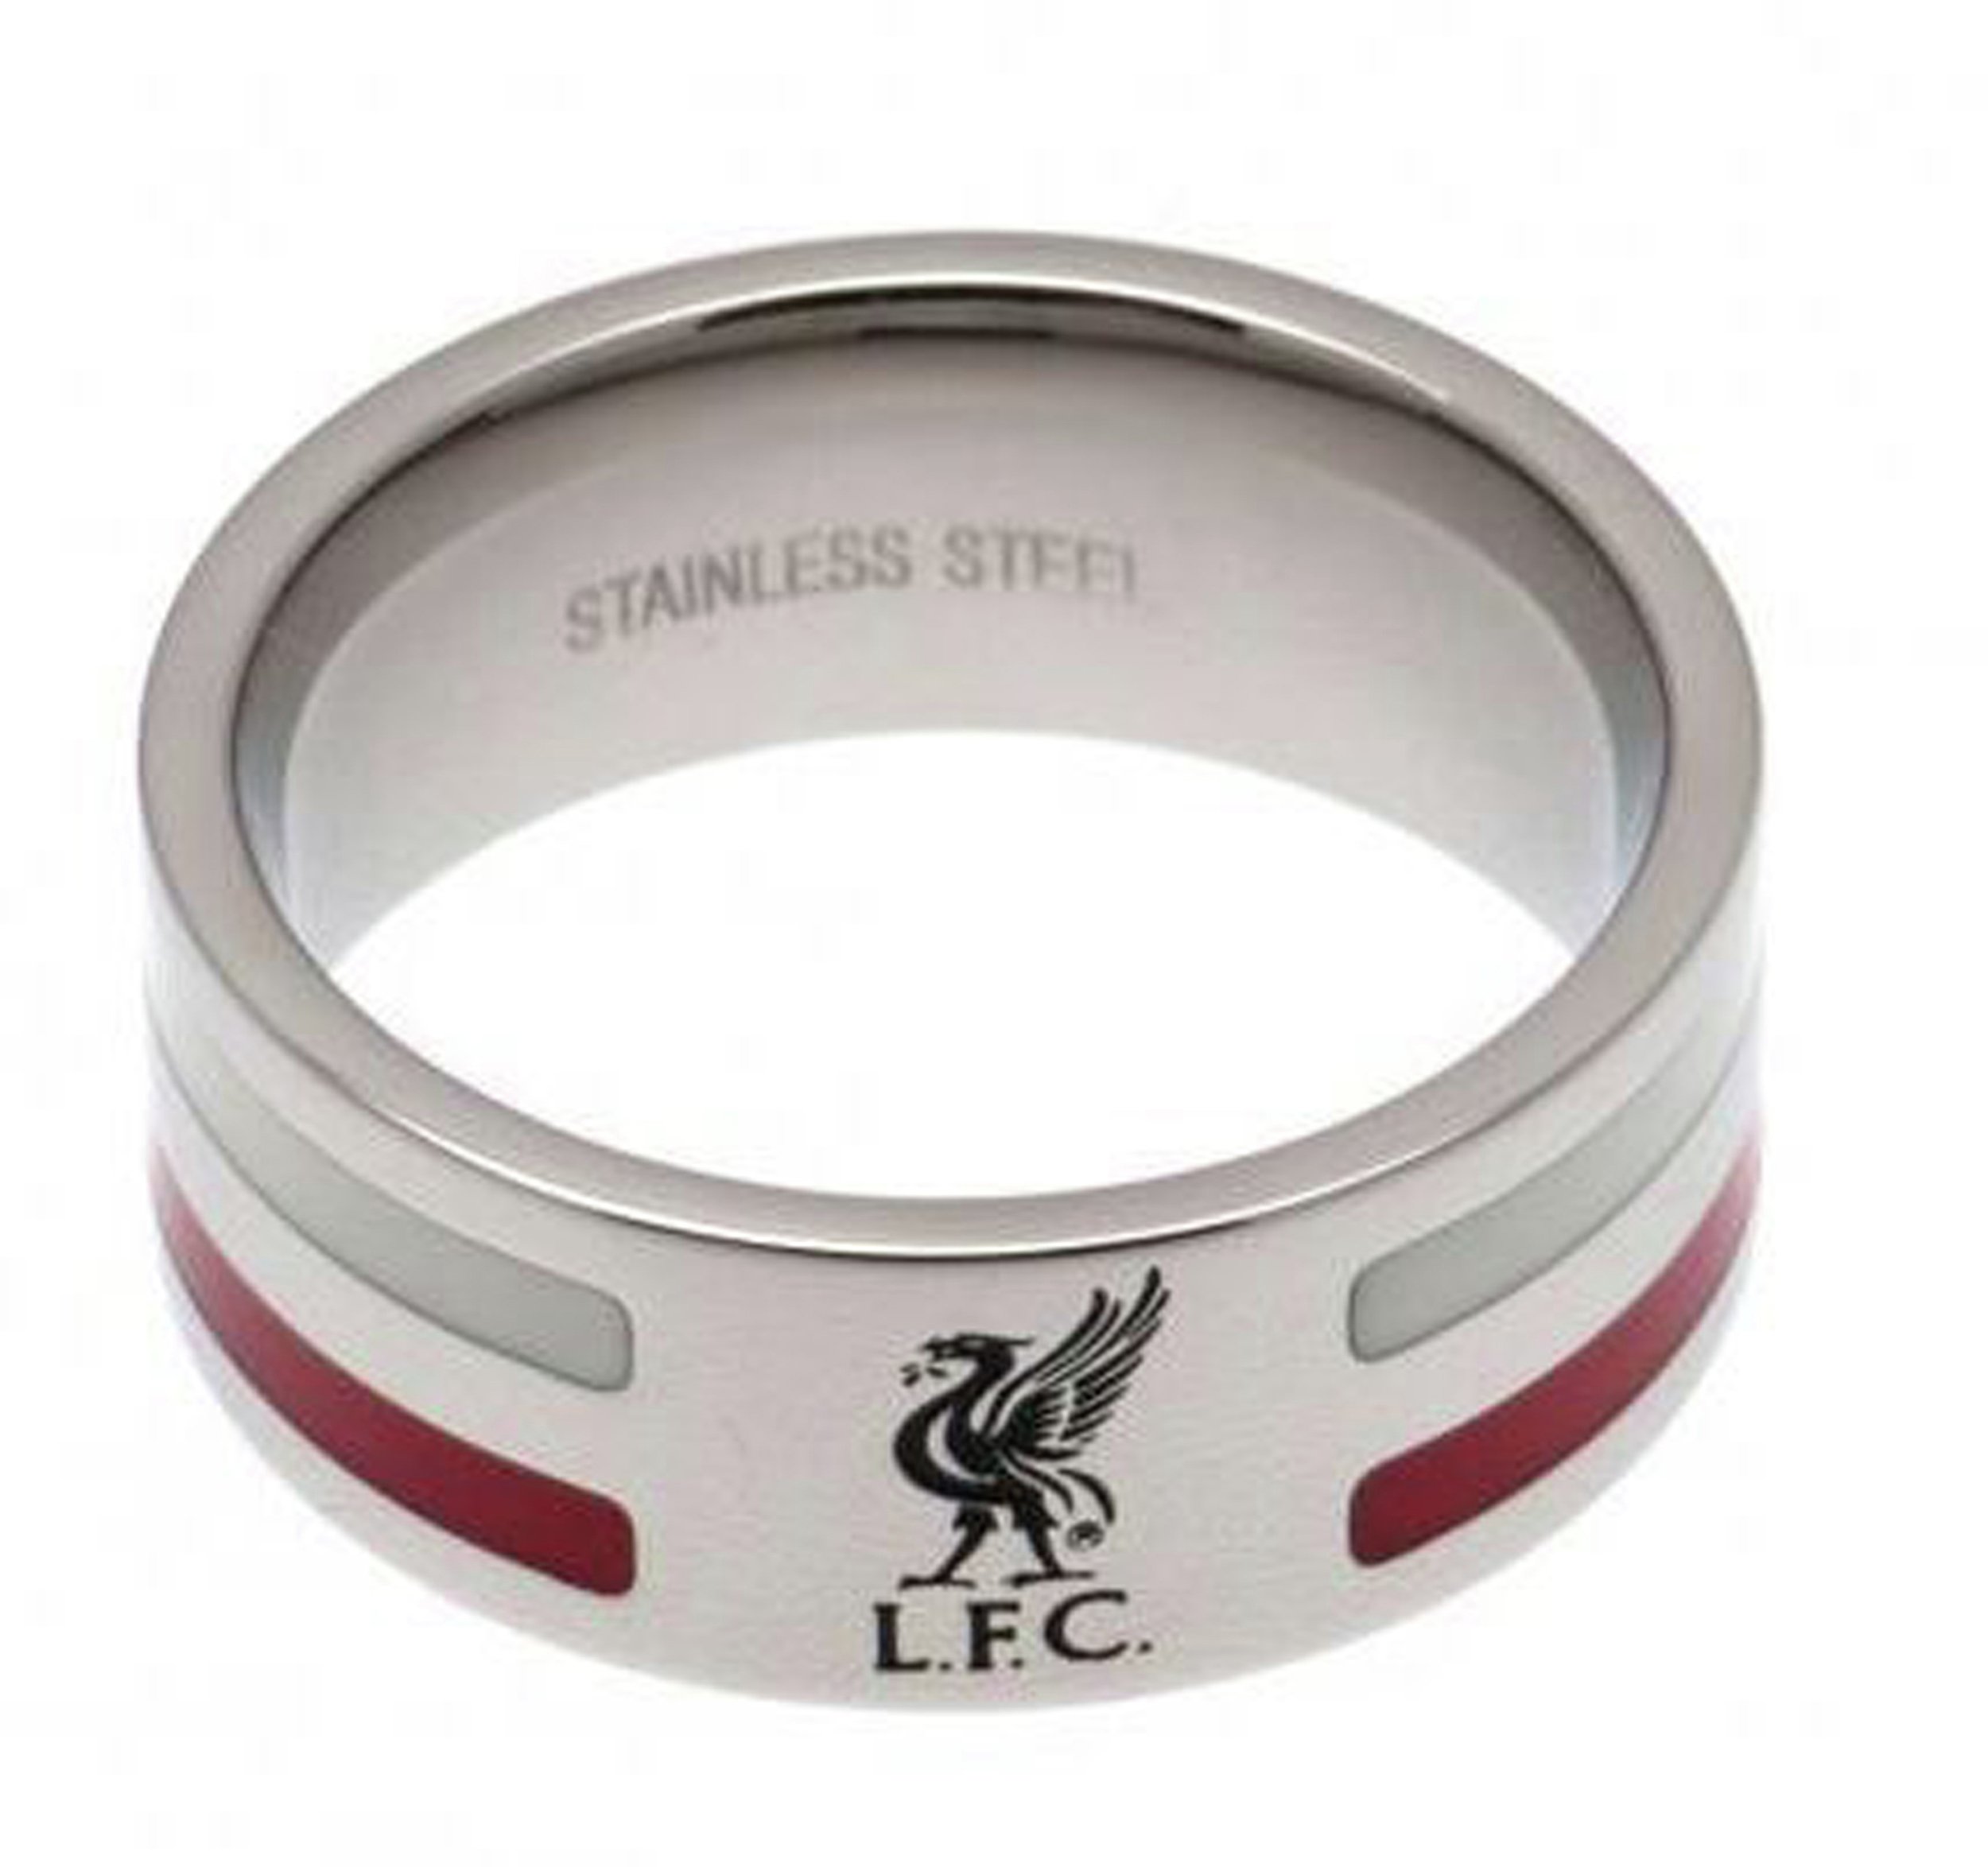 Stainless Steel Liverpool Striped Ring - Size X.